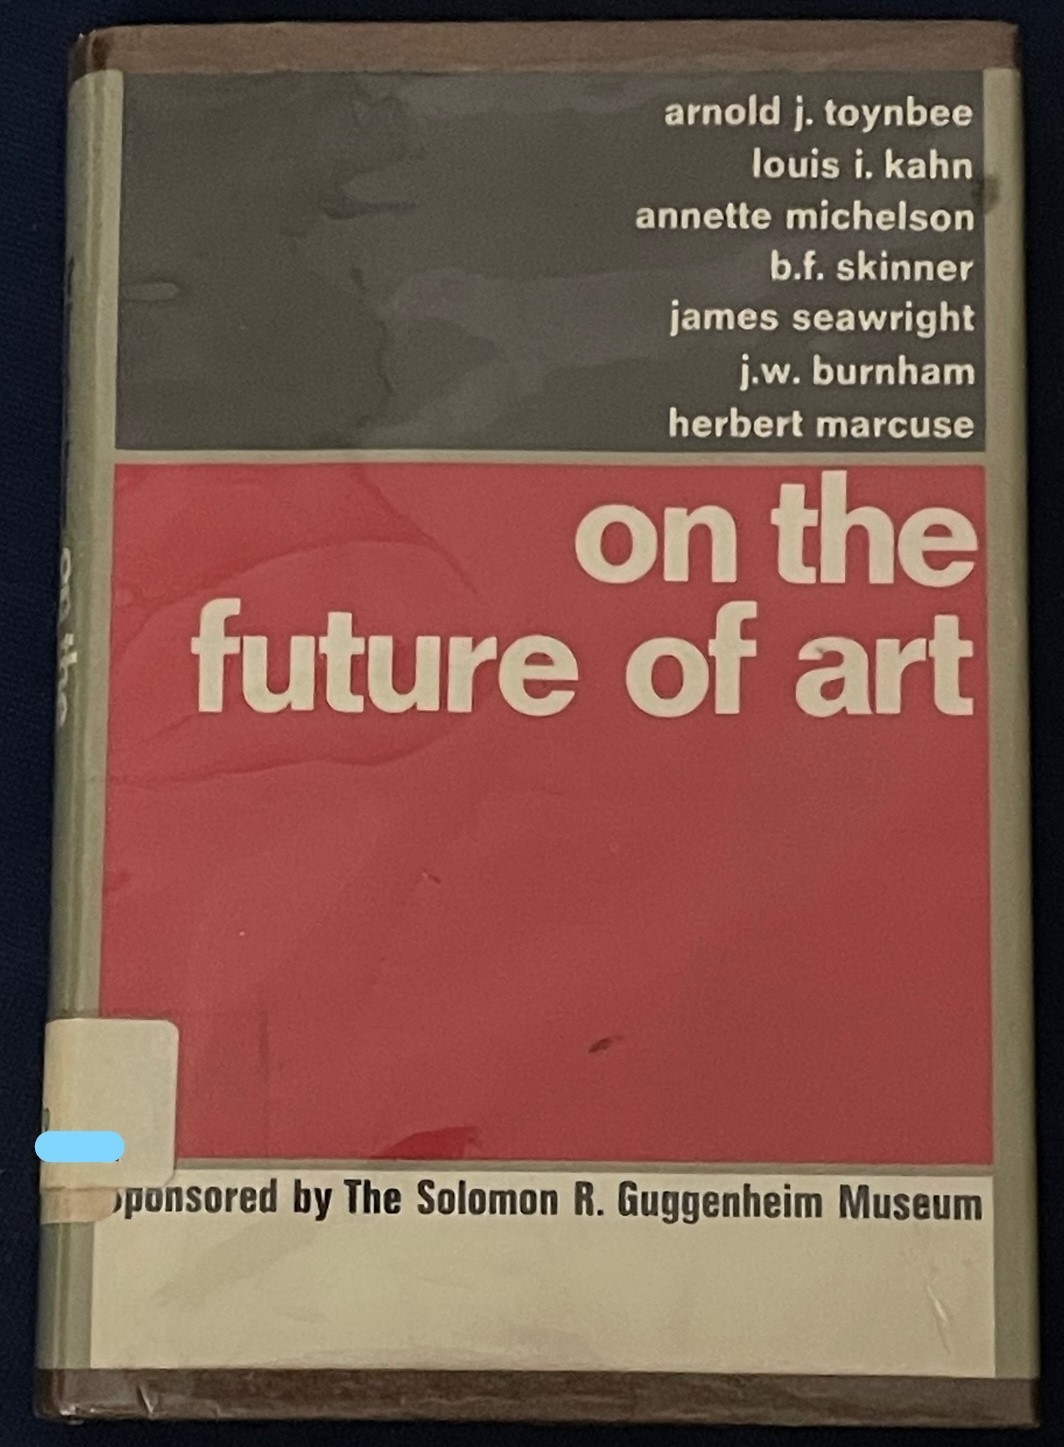 On the Future of Art